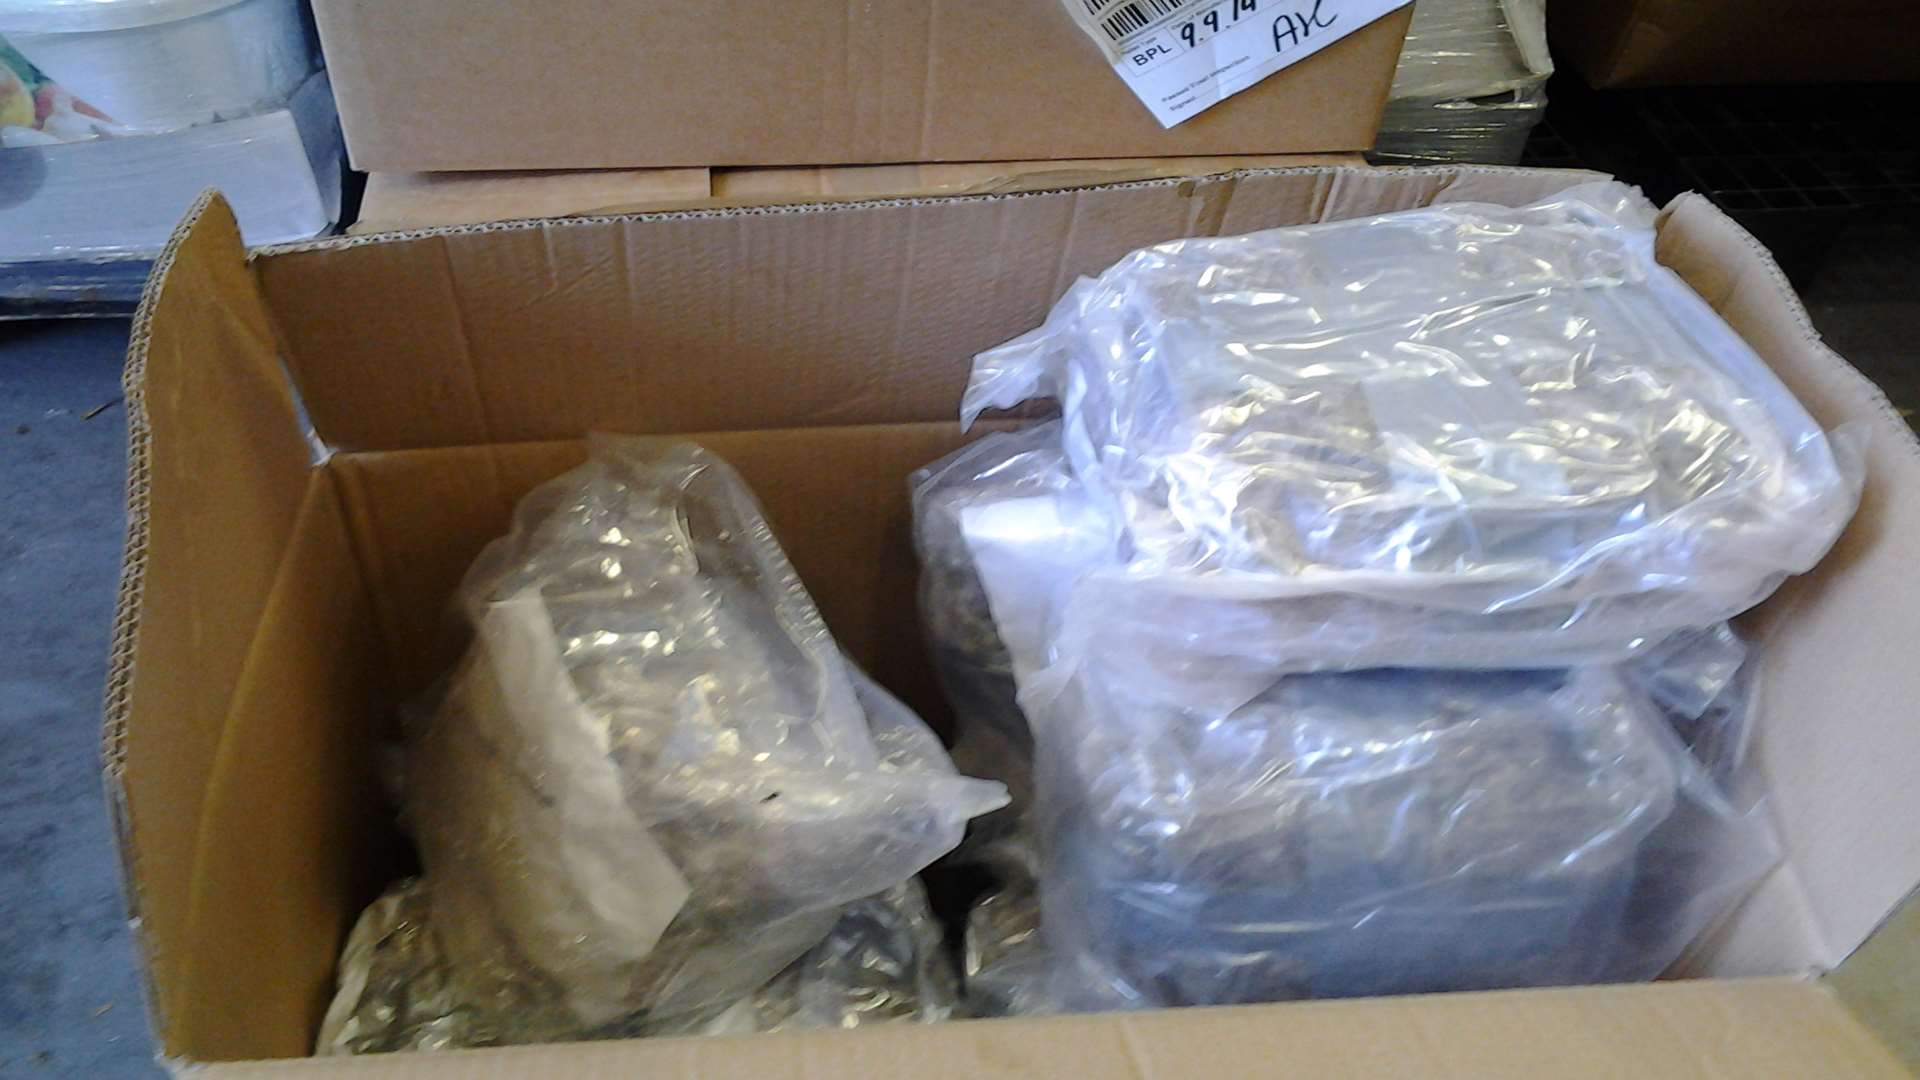 Drugs were seized in Willesborough. Picture: National Crime Agency